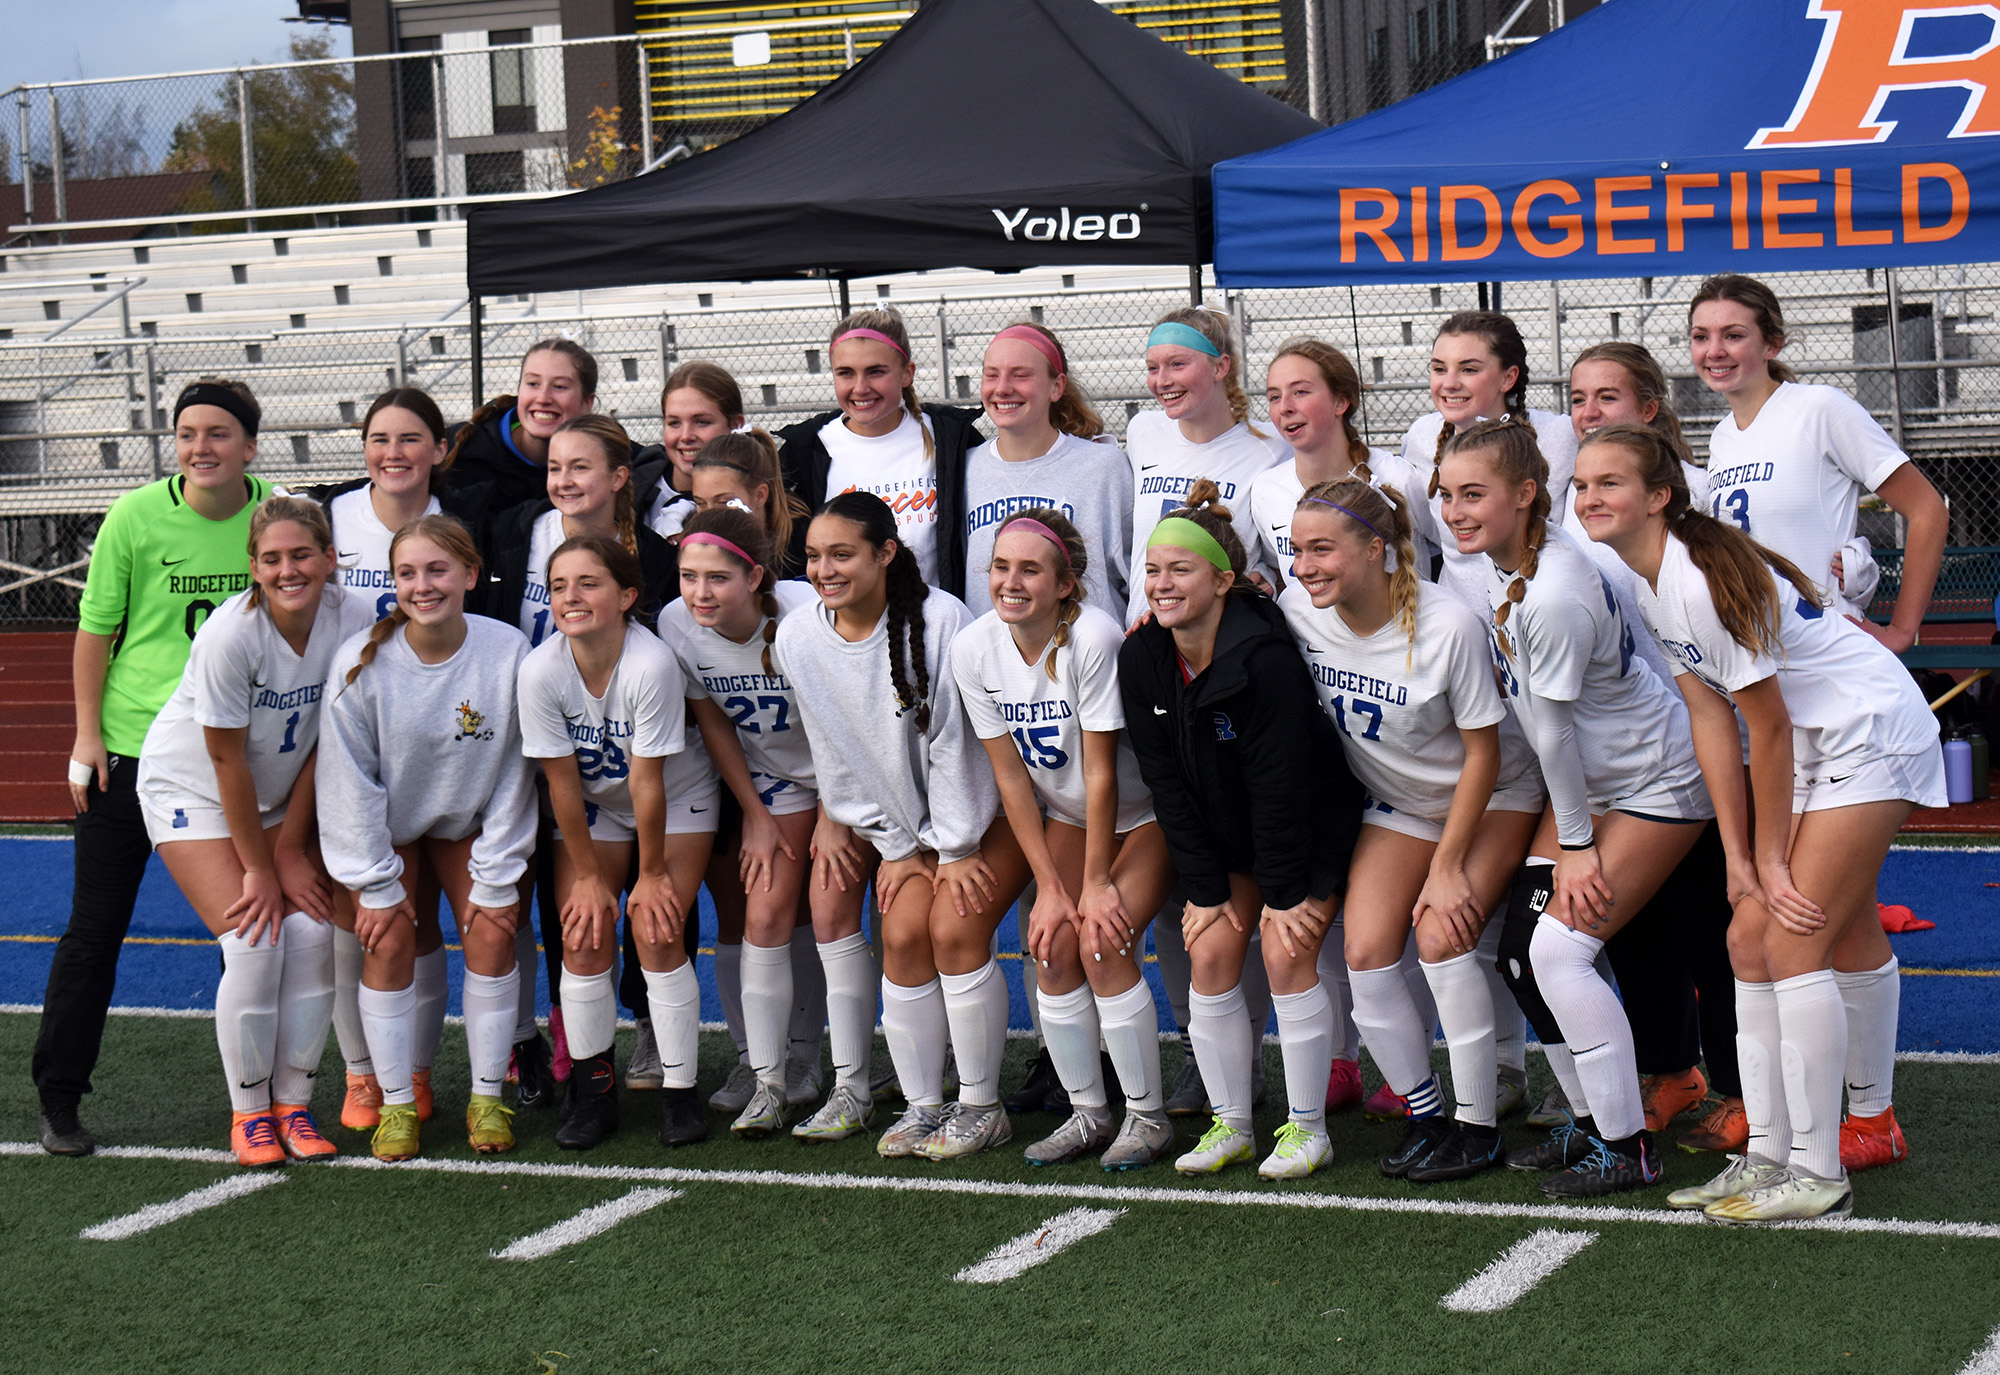 The Ridgefield girls soccer team poses for a team photo after a 2-1 win over Fife on penalty kicks in the Class 2A state quarterfinal match at Fife High School on Saturday, Nov. 11, 2023.